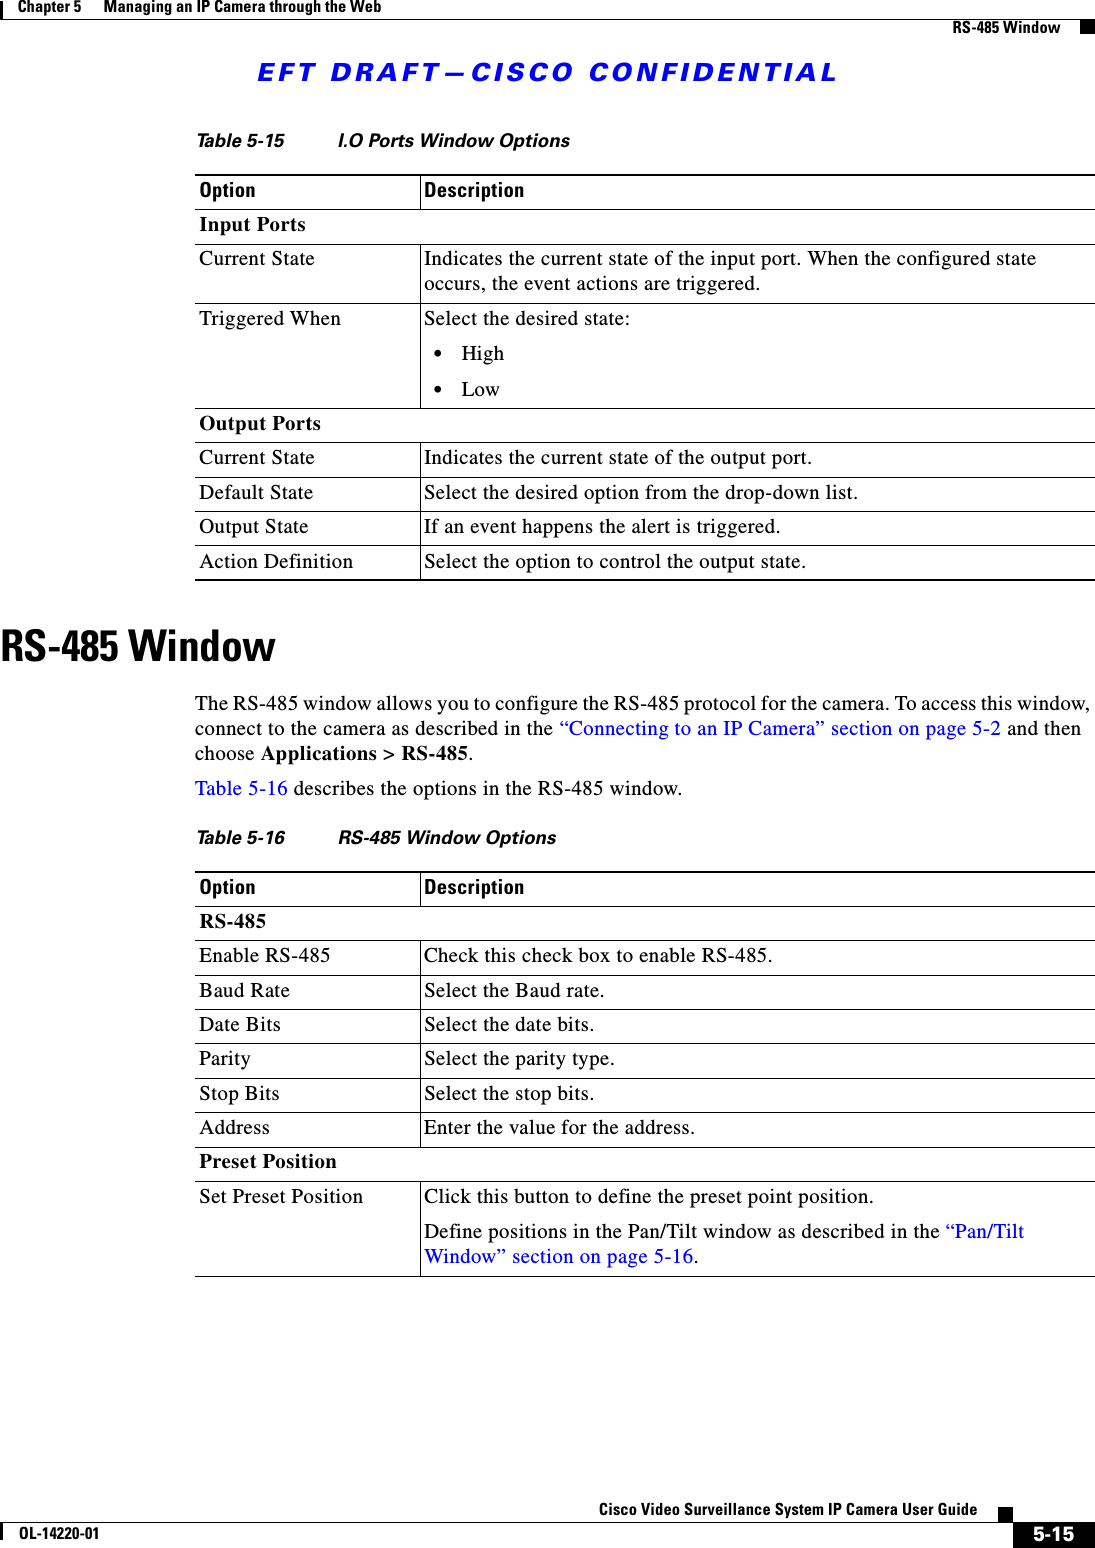 EFT DRAFT—CISCO CONFIDENTIAL5-15Cisco Video Surveillance System IP Camera User GuideOL-14220-01Chapter 5      Managing an IP Camera through the WebRS-485 WindowRS-485 WindowThe RS-485 window allows you to configure the RS-485 protocol for the camera. To access this window, connect to the camera as described in the “Connecting to an IP Camera” section on page 5-2 and then choose Applications &gt; RS-485.Table 5-16 describes the options in the RS-485 window.Table 5-15 I.O Ports Window OptionsOption DescriptionInput PortsCurrent State Indicates the current state of the input port. When the configured state occurs, the event actions are triggered.Triggered When Select the desired state:•High•LowOutput PortsCurrent State Indicates the current state of the output port. Default State Select the desired option from the drop-down list.Output State If an event happens the alert is triggered.Action Definition Select the option to control the output state.Table 5-16 RS-485 Window OptionsOption DescriptionRS-485Enable RS-485 Check this check box to enable RS-485.Baud Rate Select the Baud rate.Date Bits Select the date bits.Parity Select the parity type.Stop Bits Select the stop bits.Address Enter the value for the address.Preset PositionSet Preset Position Click this button to define the preset point position. Define positions in the Pan/Tilt window as described in the “Pan/Tilt Window” section on page 5-16.